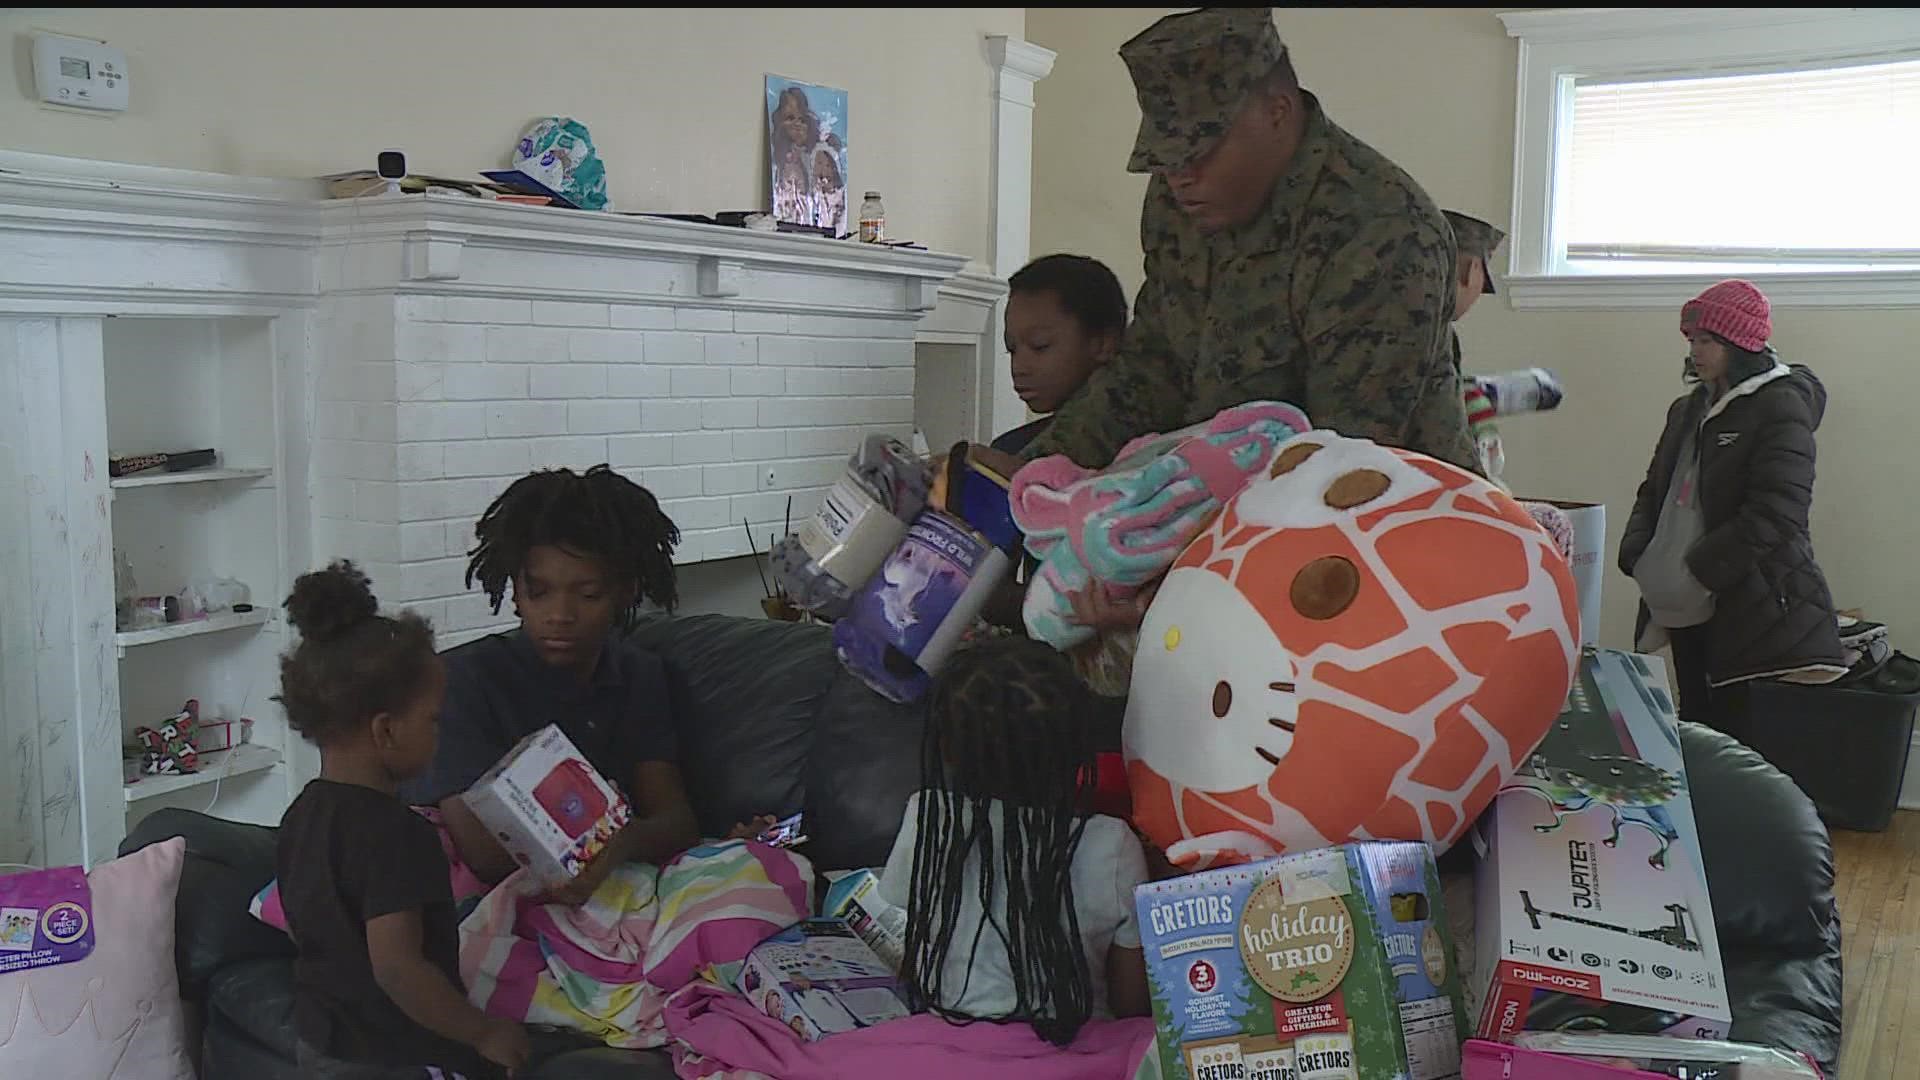 "I think the feeling of receiving a toy is just as good of a feeling as giving a toy," said Staff Sergeant Tyree Stevens. "A smile on a face warms your heart."